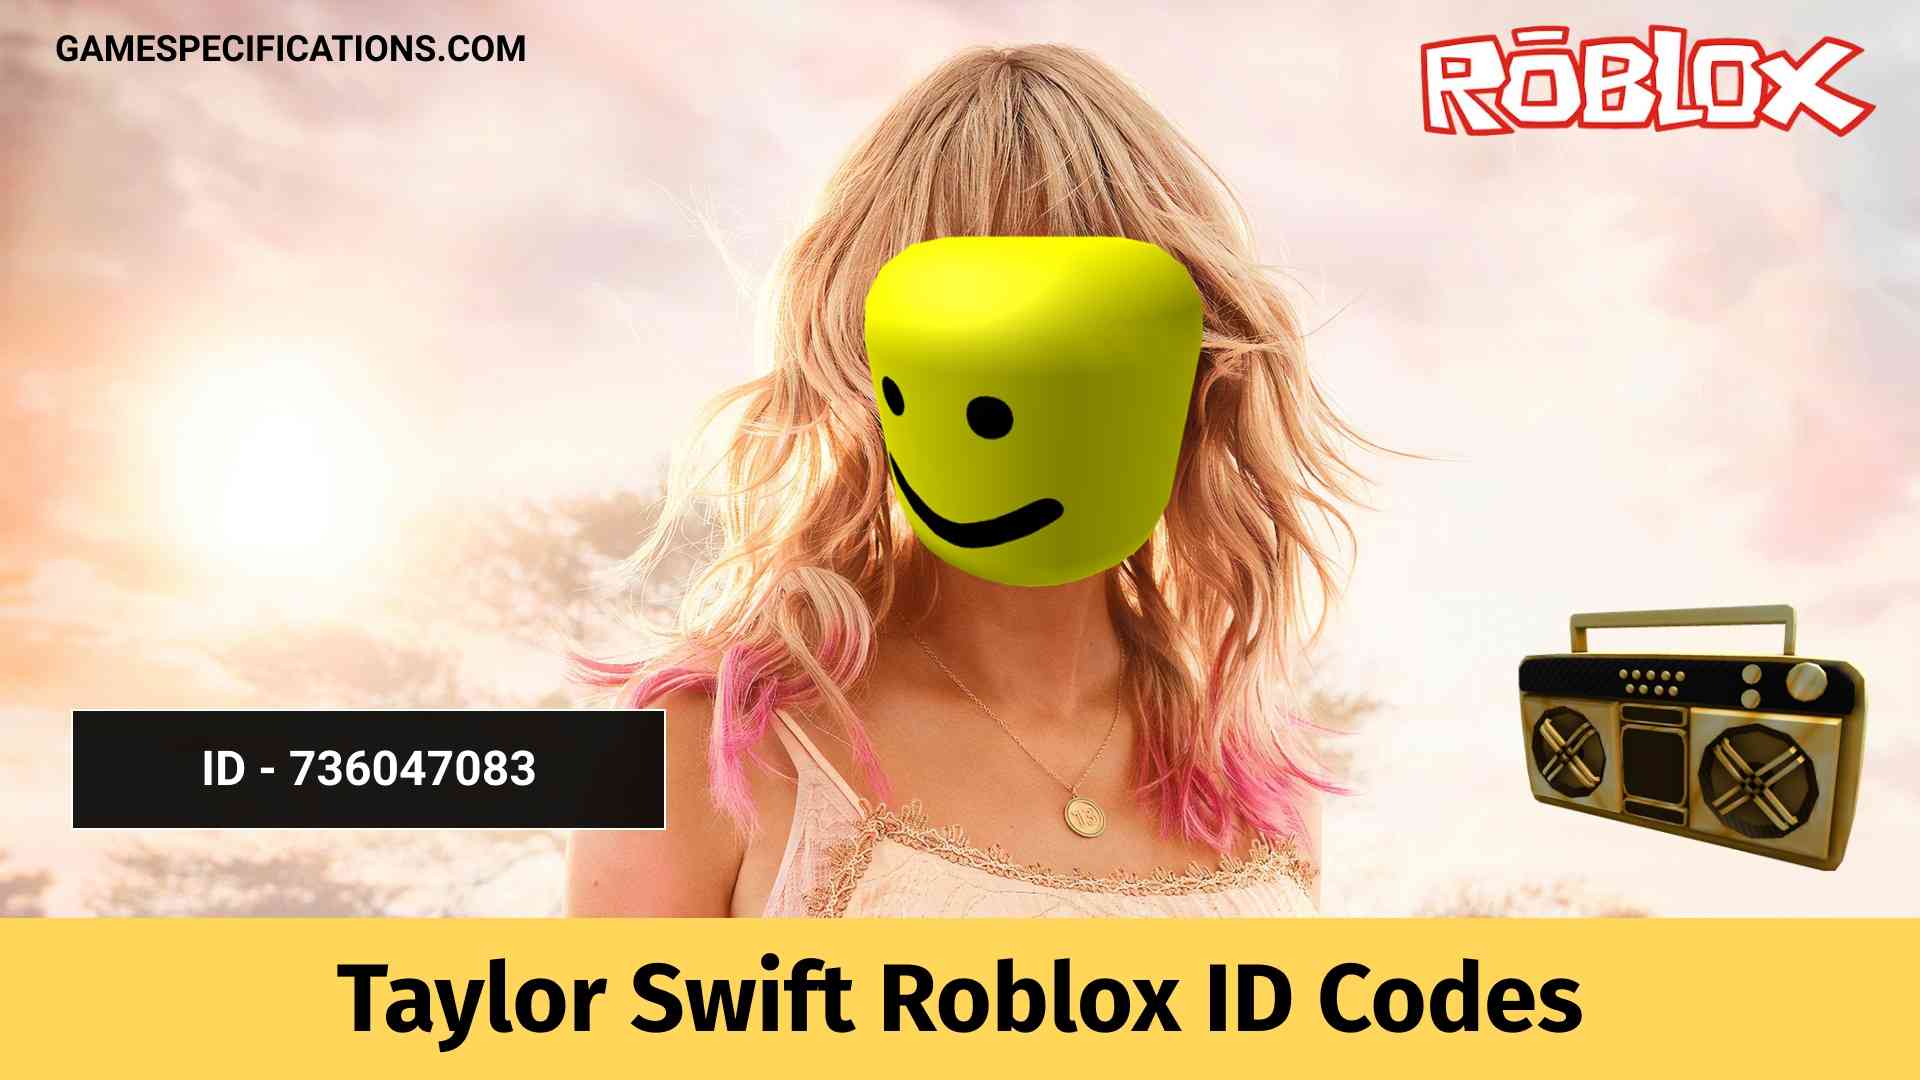 Taylor Swift Roblox Id Codes To Play Pop Songs 2021 Game Specifications - we are number one remix roblox id